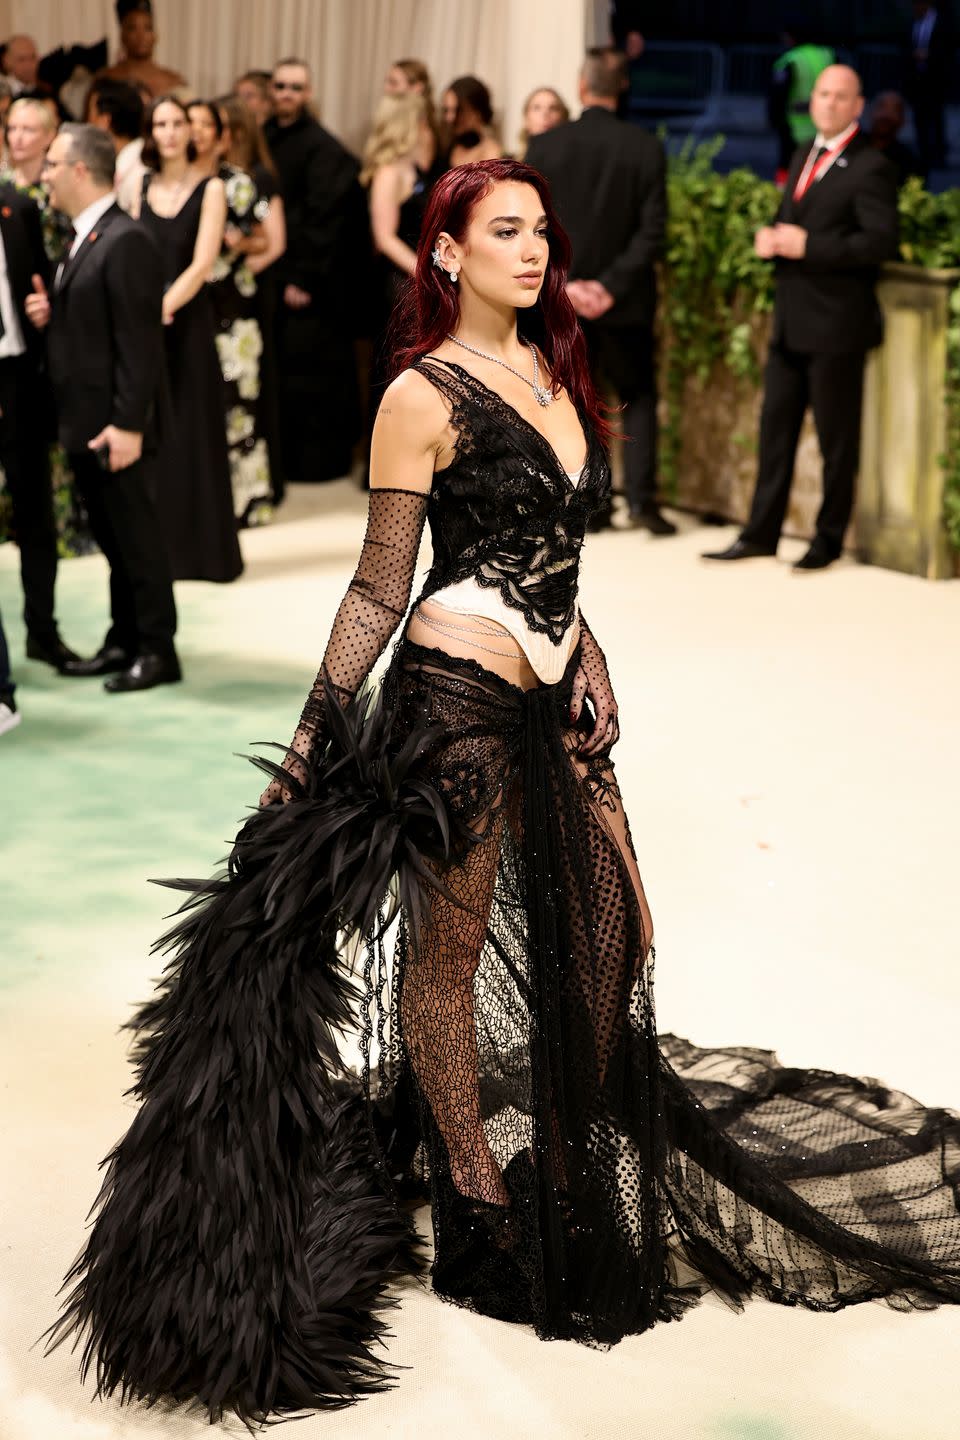 new york, new york may 06 dua lipa attends the 2024 met gala celebrating sleeping beauties reawakening fashion at the metropolitan museum of art on may 06, 2024 in new york city photo by theo wargogathe hollywood reporter via getty images